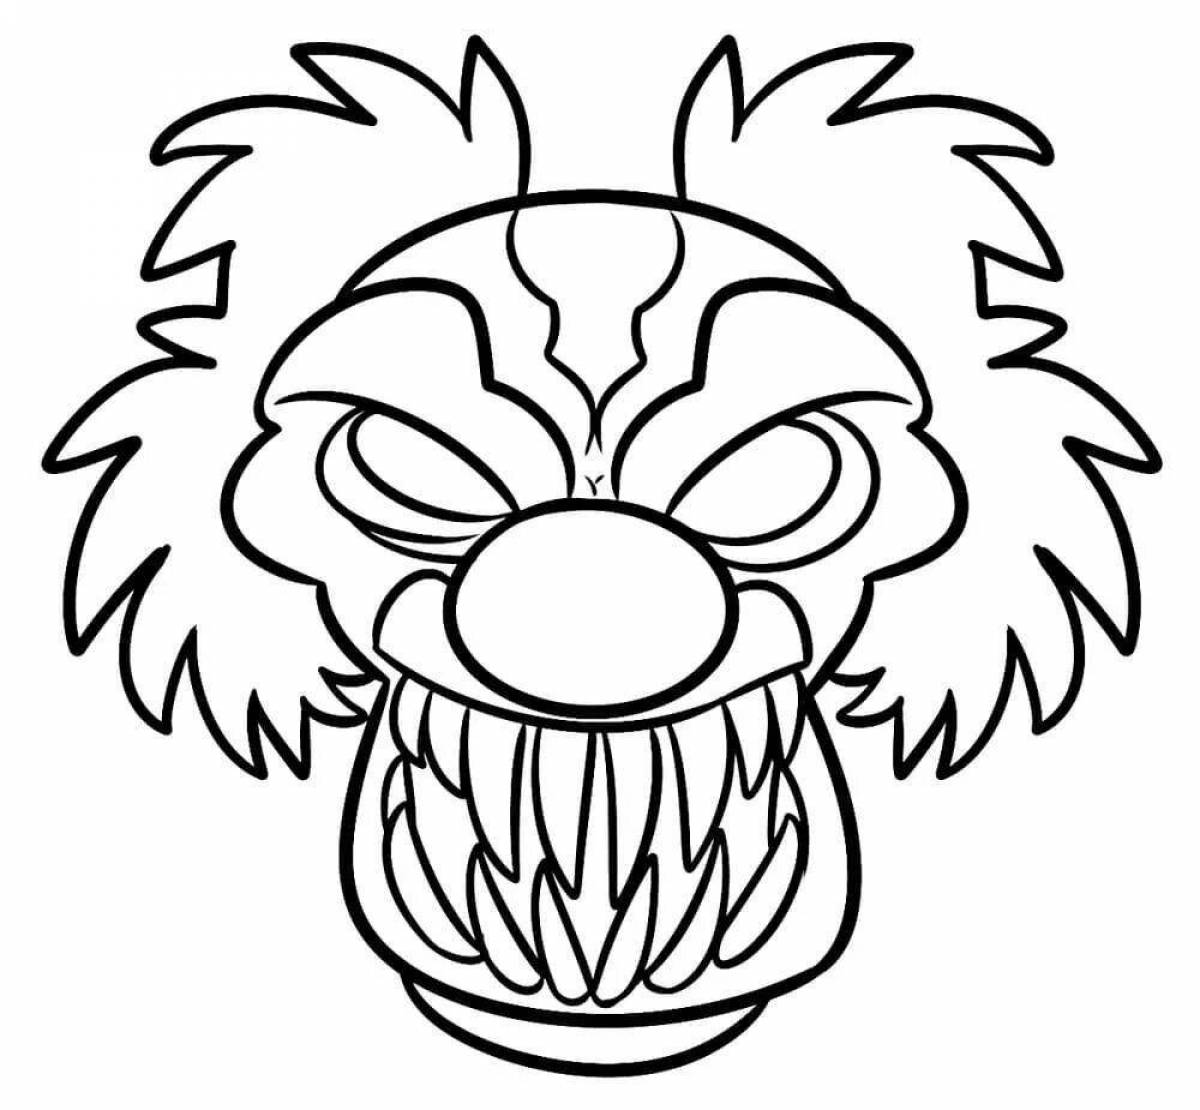 Pennywise's relentless coloring book